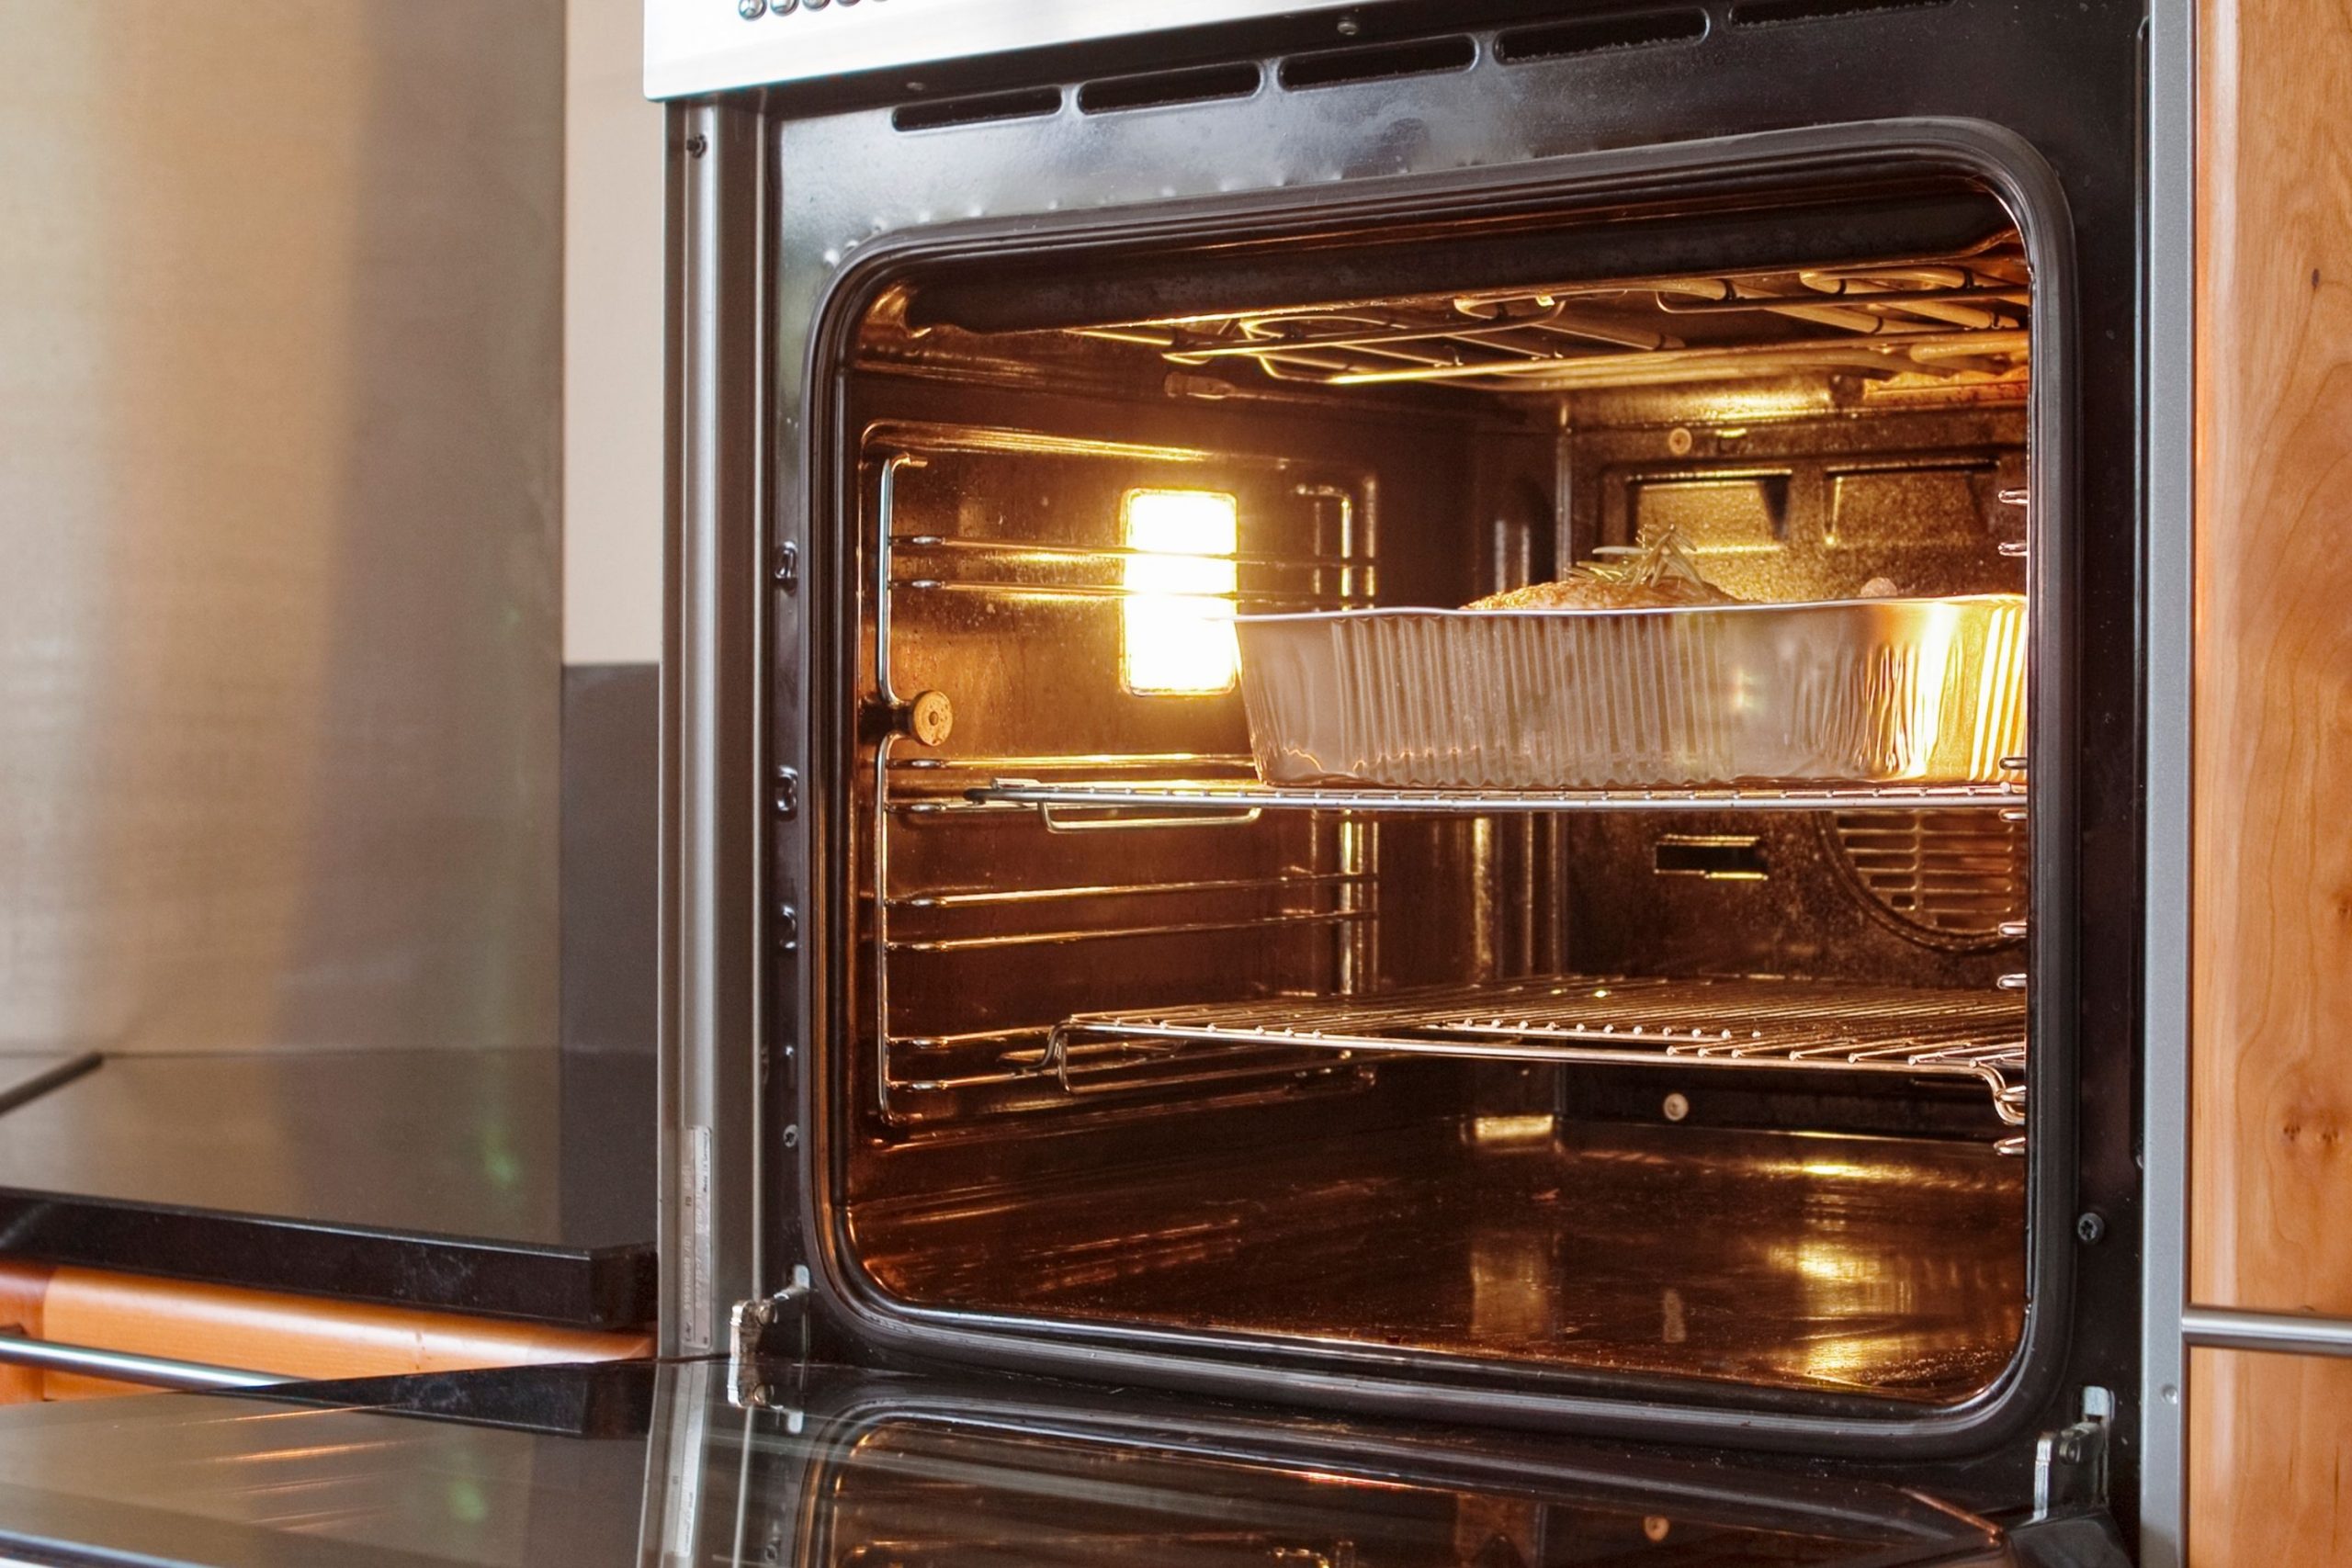 What Noises Can Be Considered Normal For Your Oven